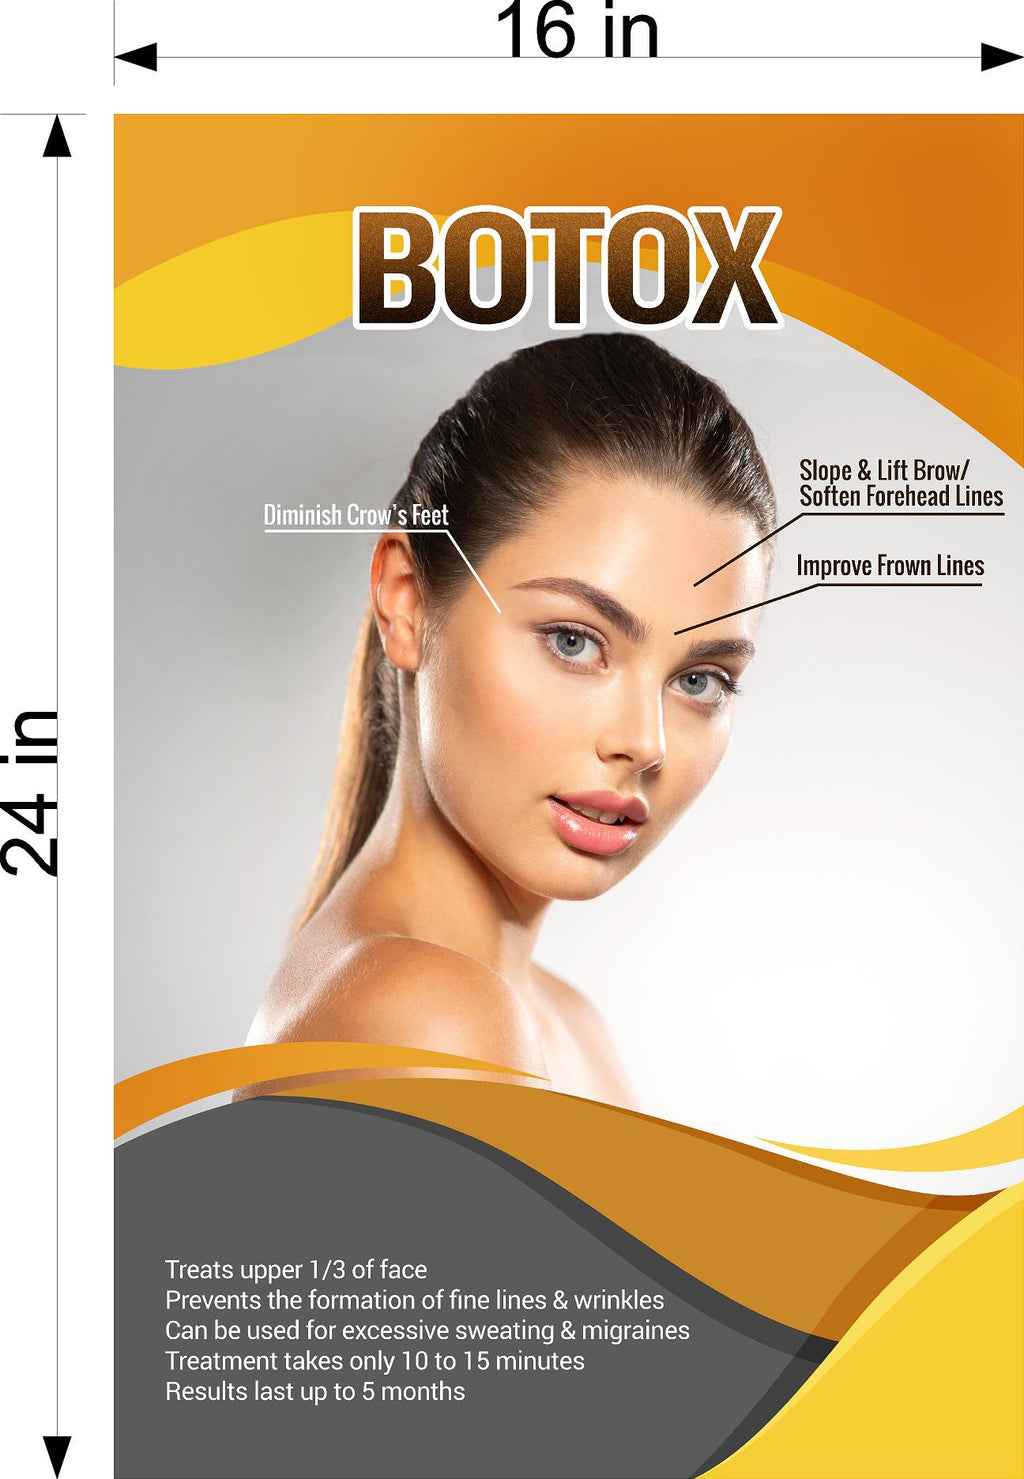 Botox 18 Photo-Realistic Paper Poster Premium Interior Inside Sign Advertising Marketing Wall Window Non-Laminated Vertical